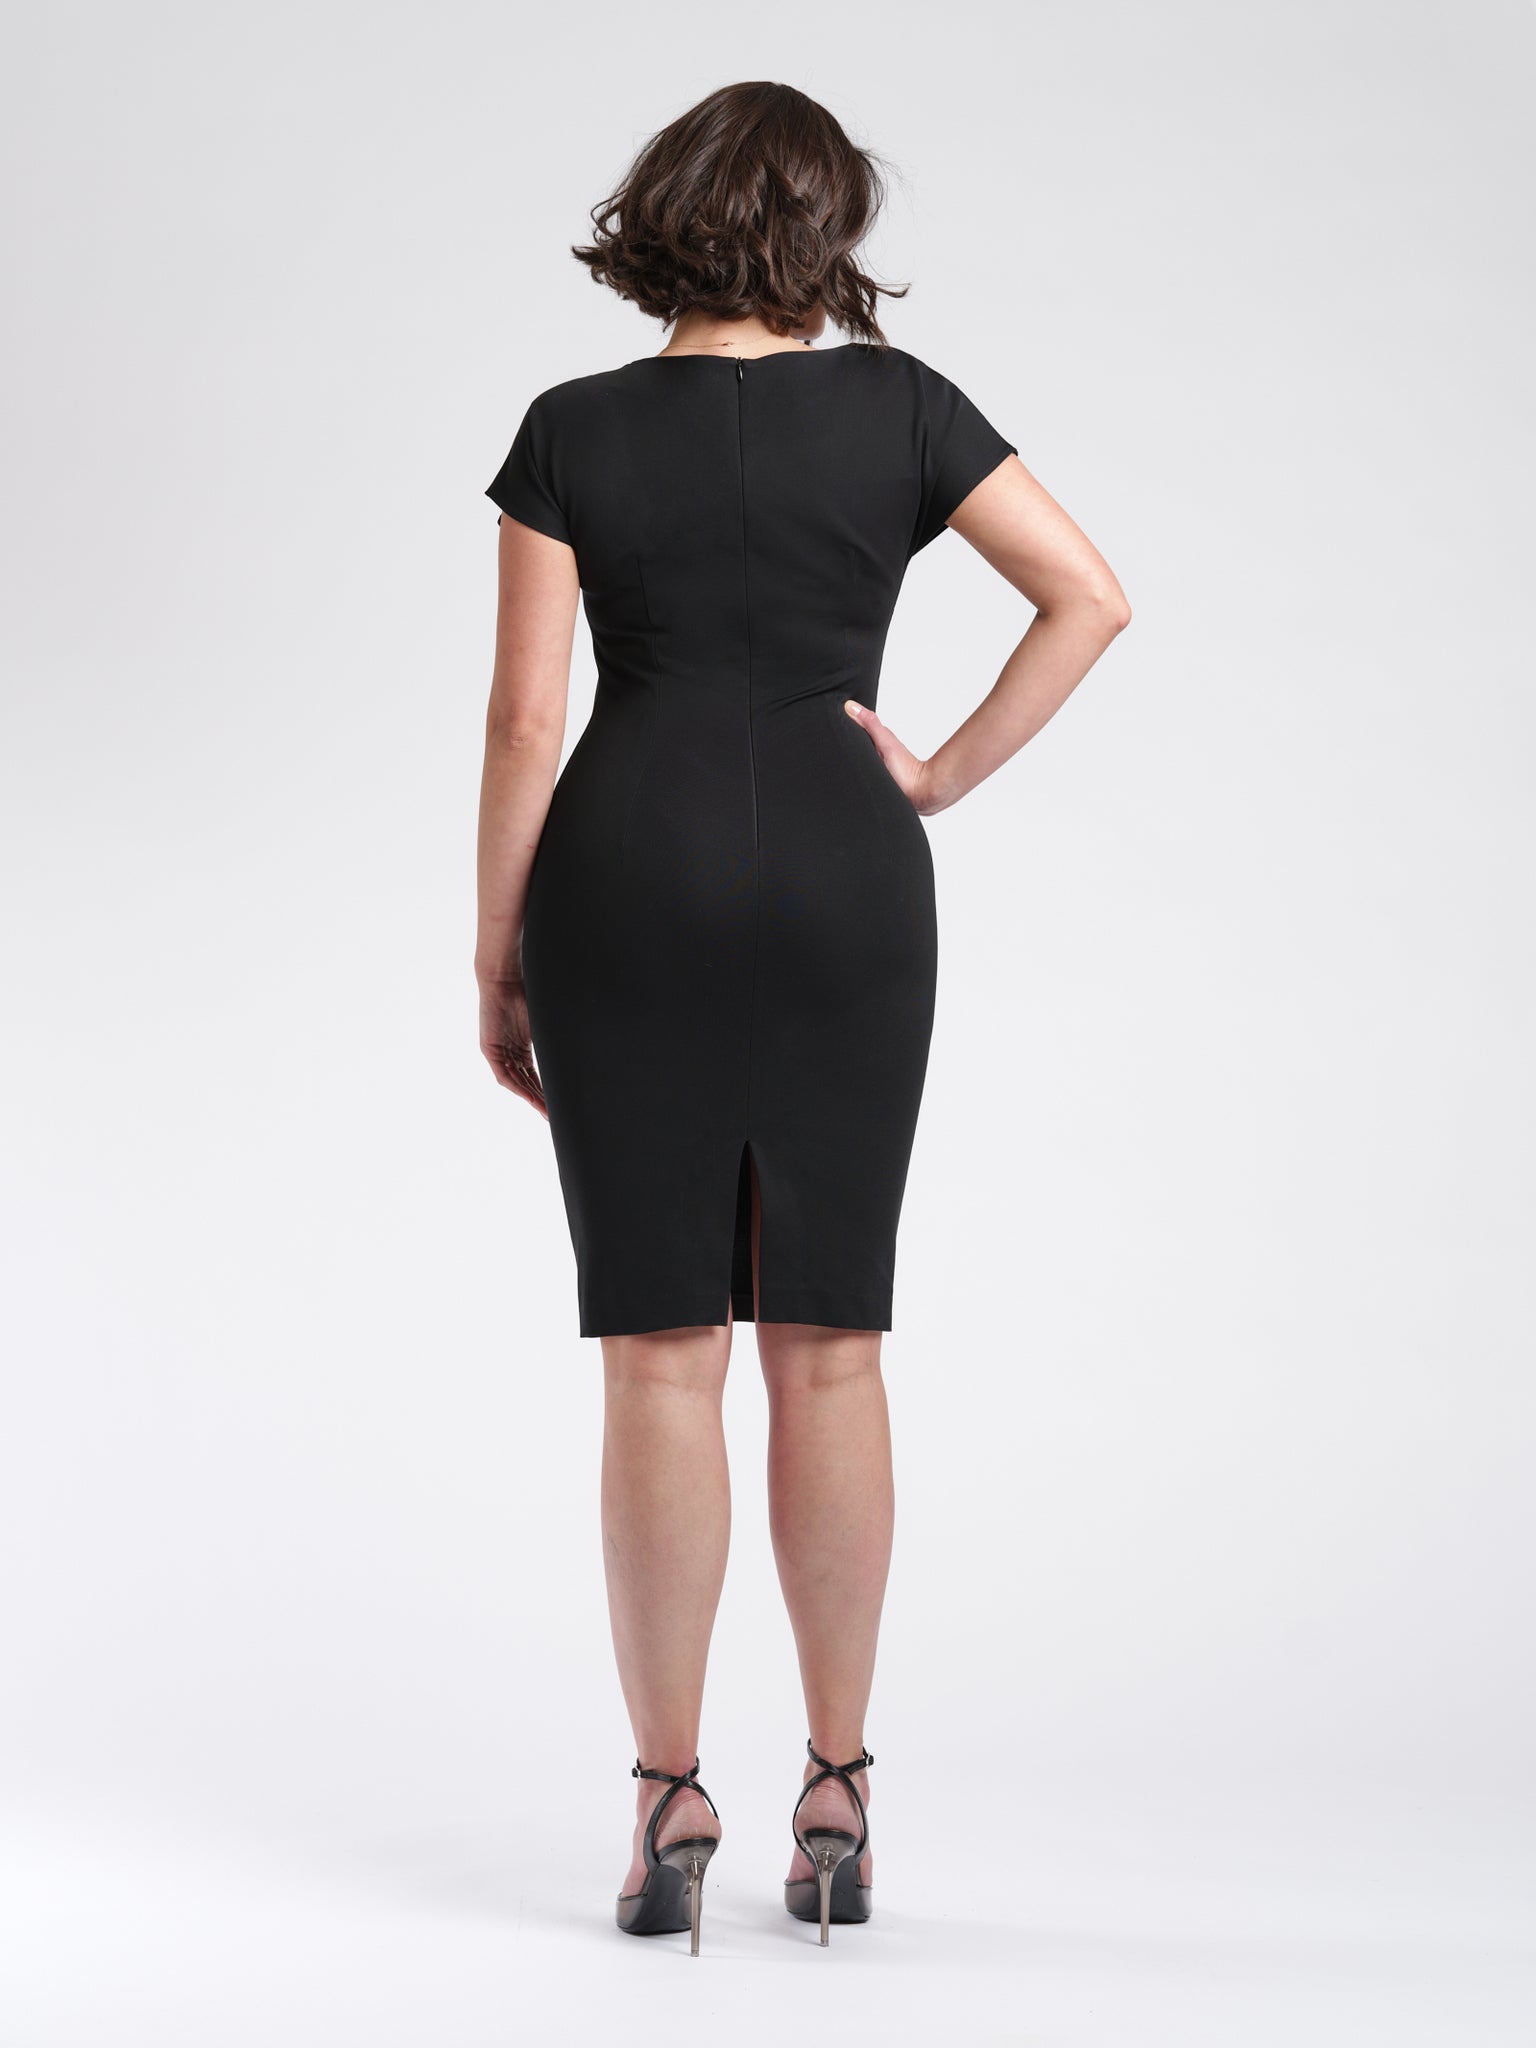 Back view of a woman wearing a black fuller bust stretch viscose dress with side draping details and short kimono sleeves designed by Miriam Baker.